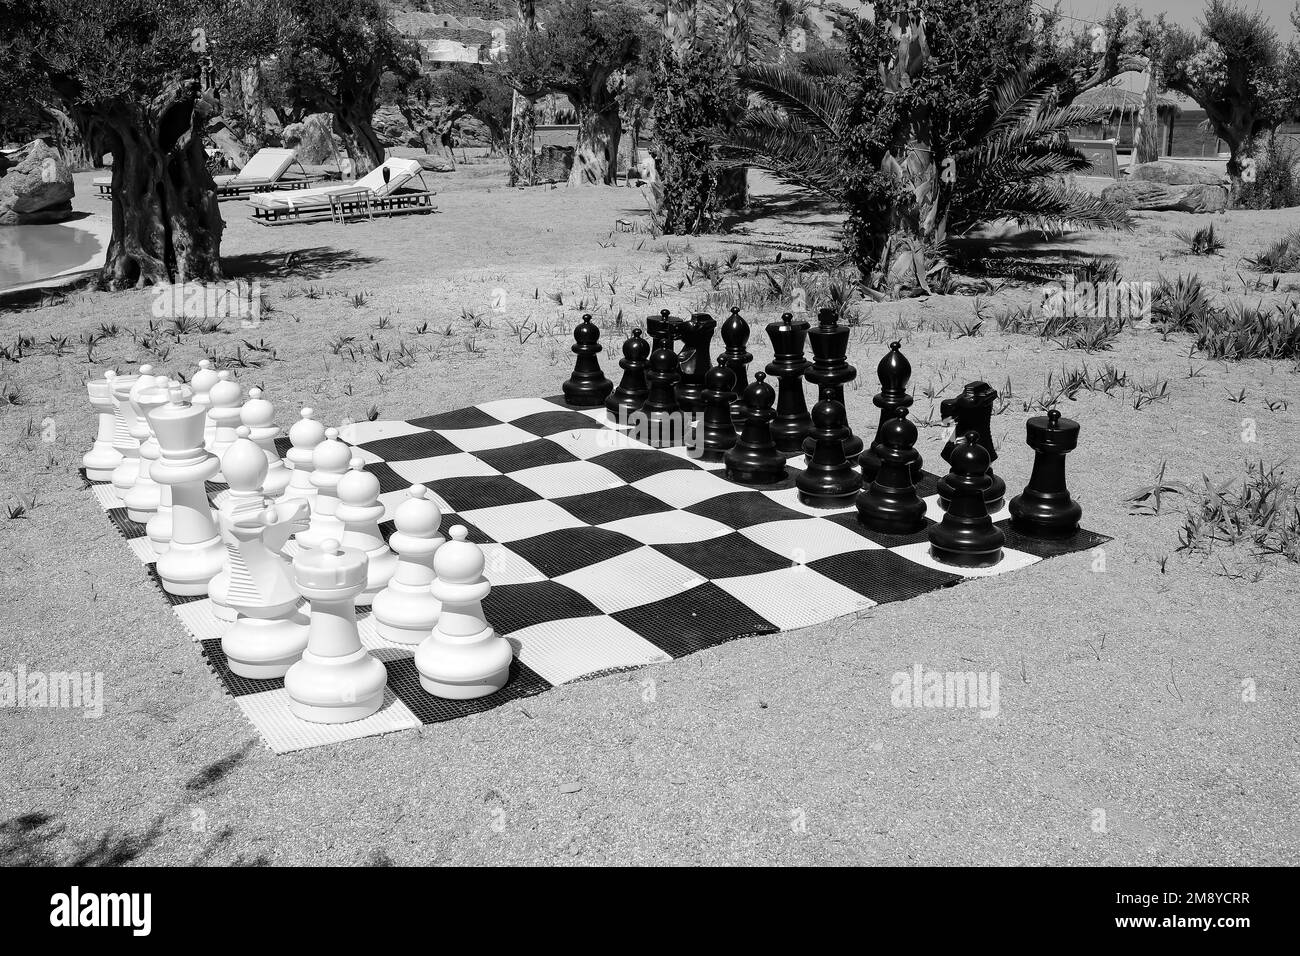 Ios, Greece - June 6, 2021 : View of a life size giant chessboard at the beach in Ios Greece in black and white Stock Photo